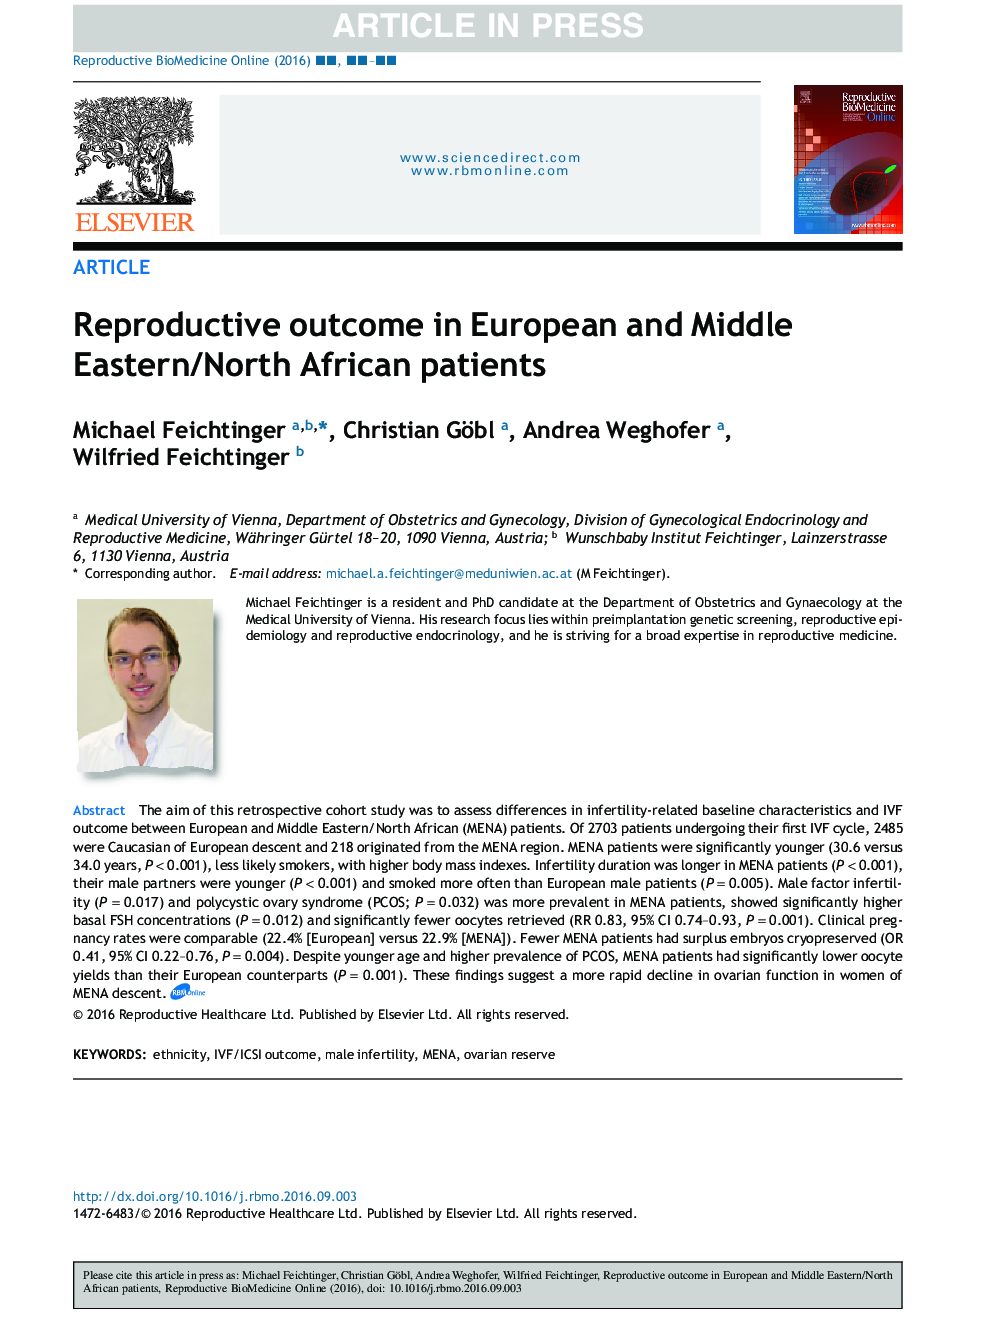 Reproductive outcome in European and Middle Eastern/North African patients